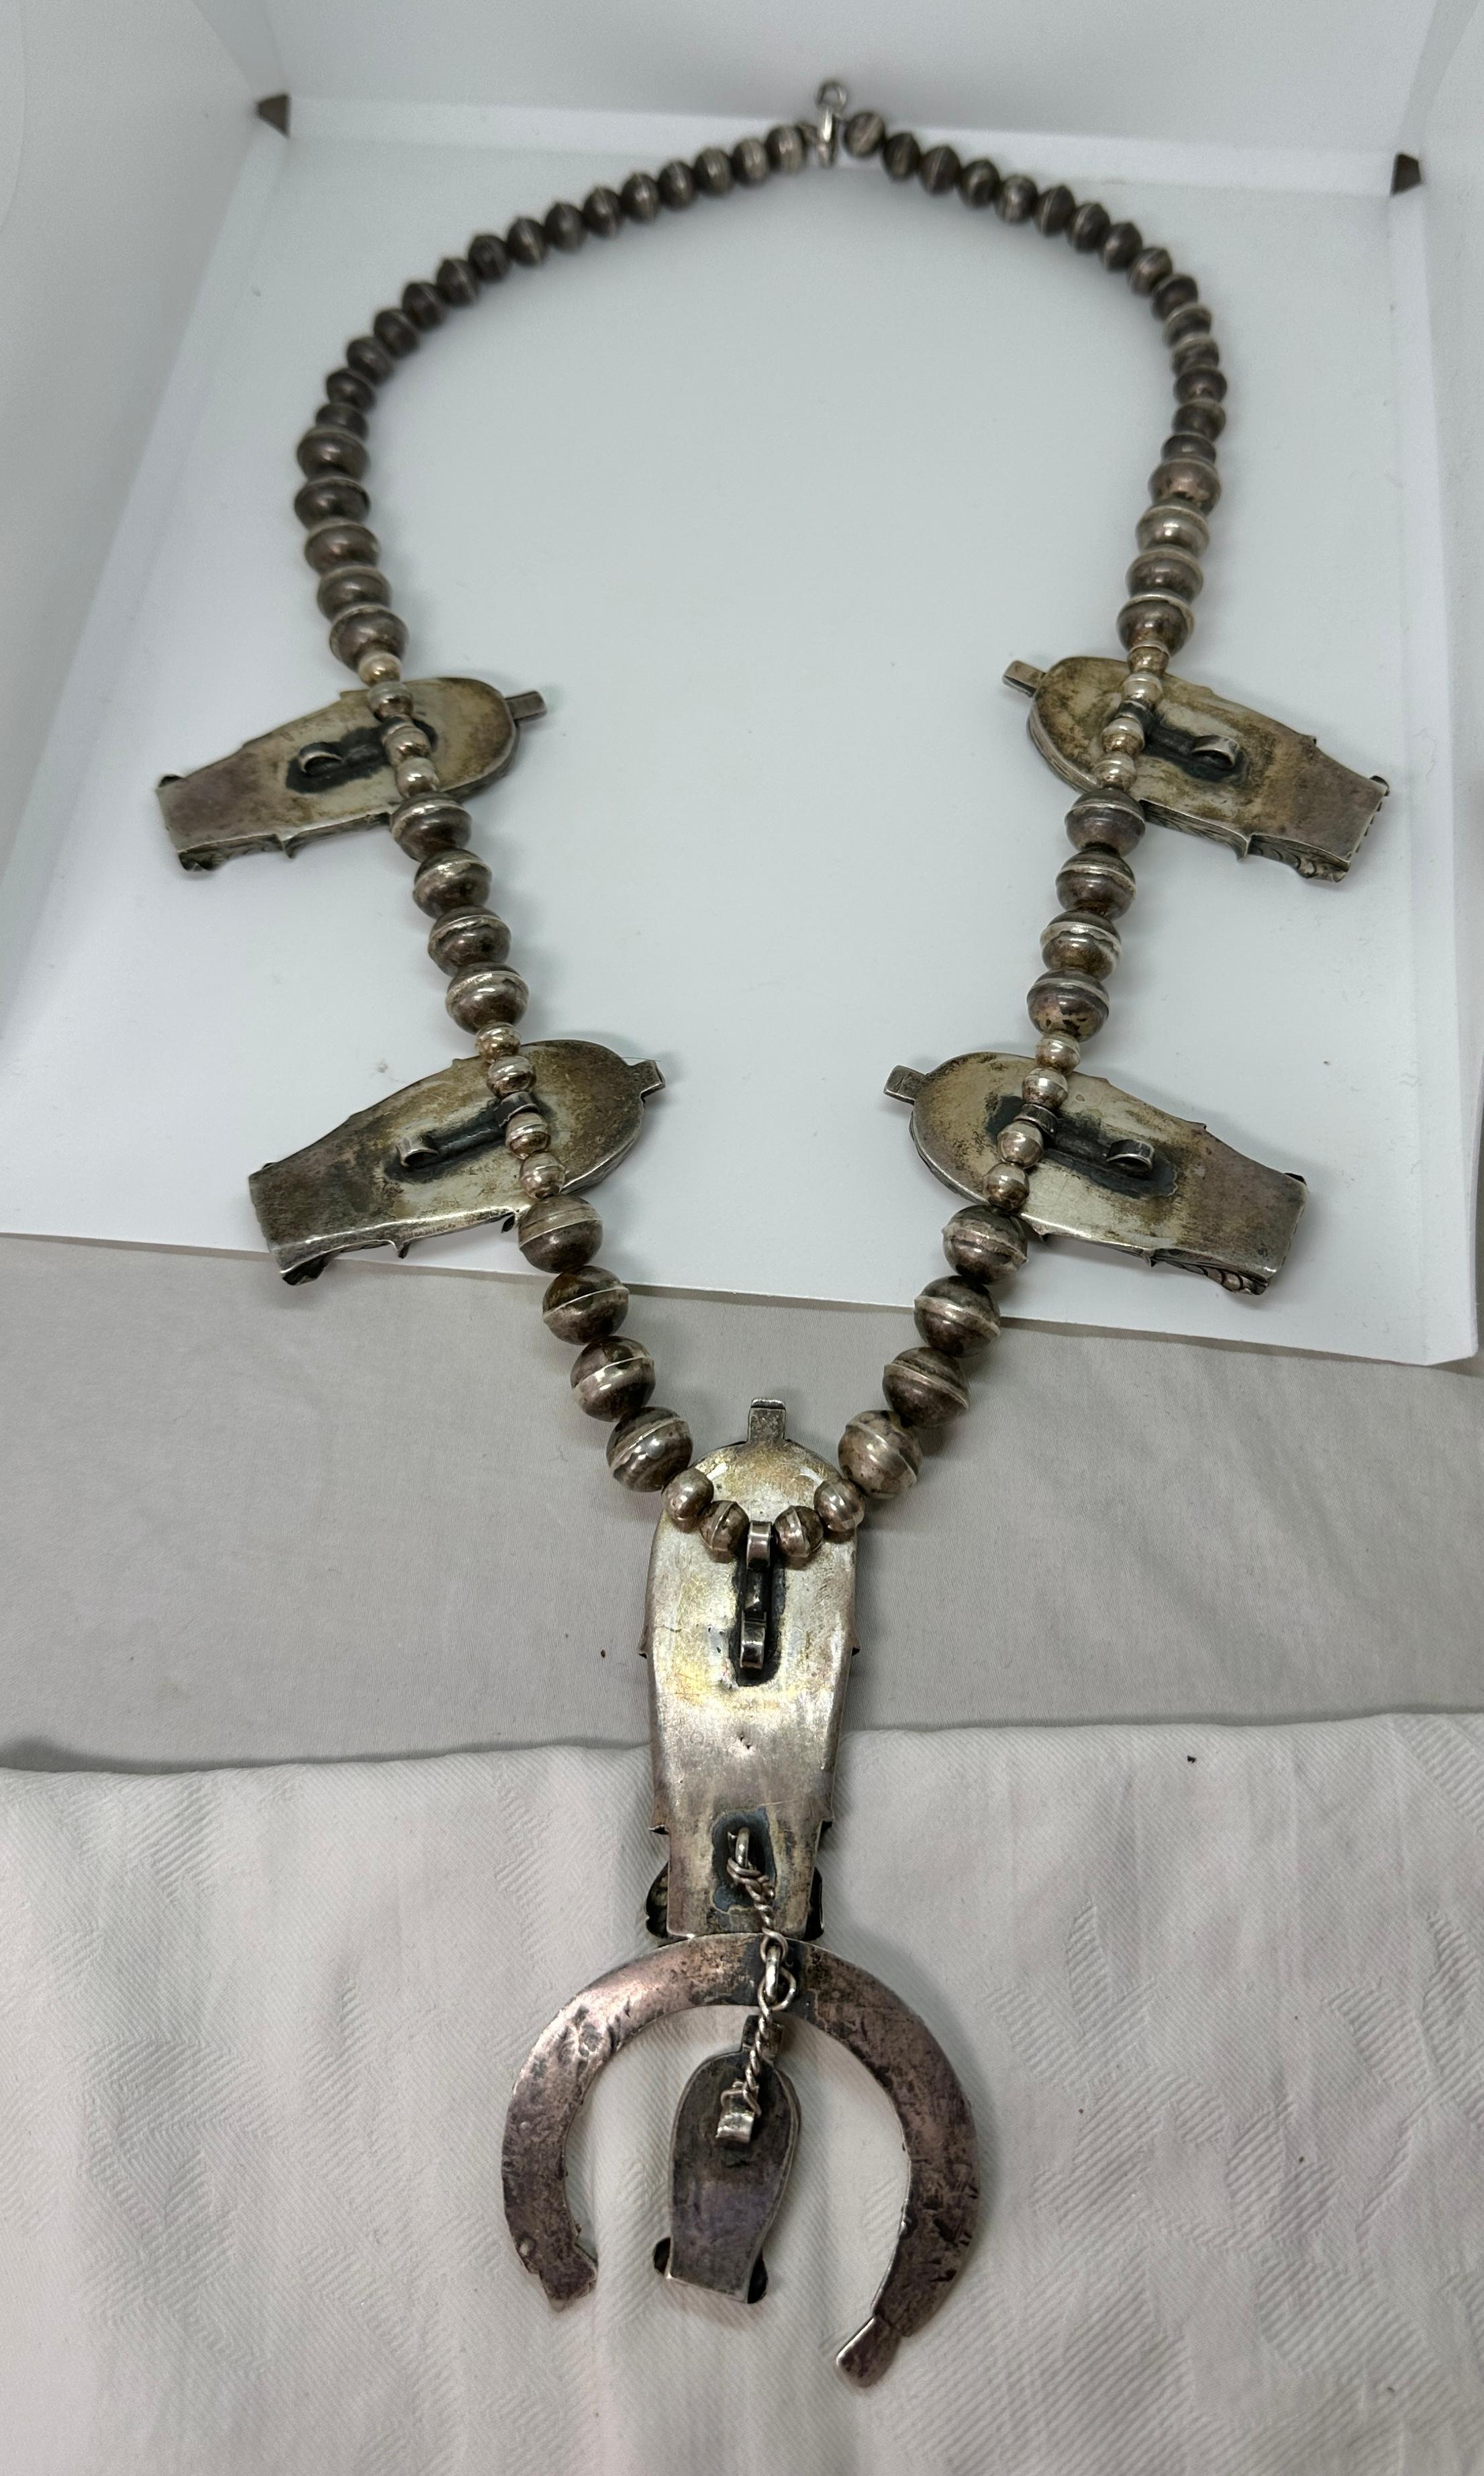  Navajo Corn Squash Blossom Necklace Museum Quality Native American Indian 1930 1